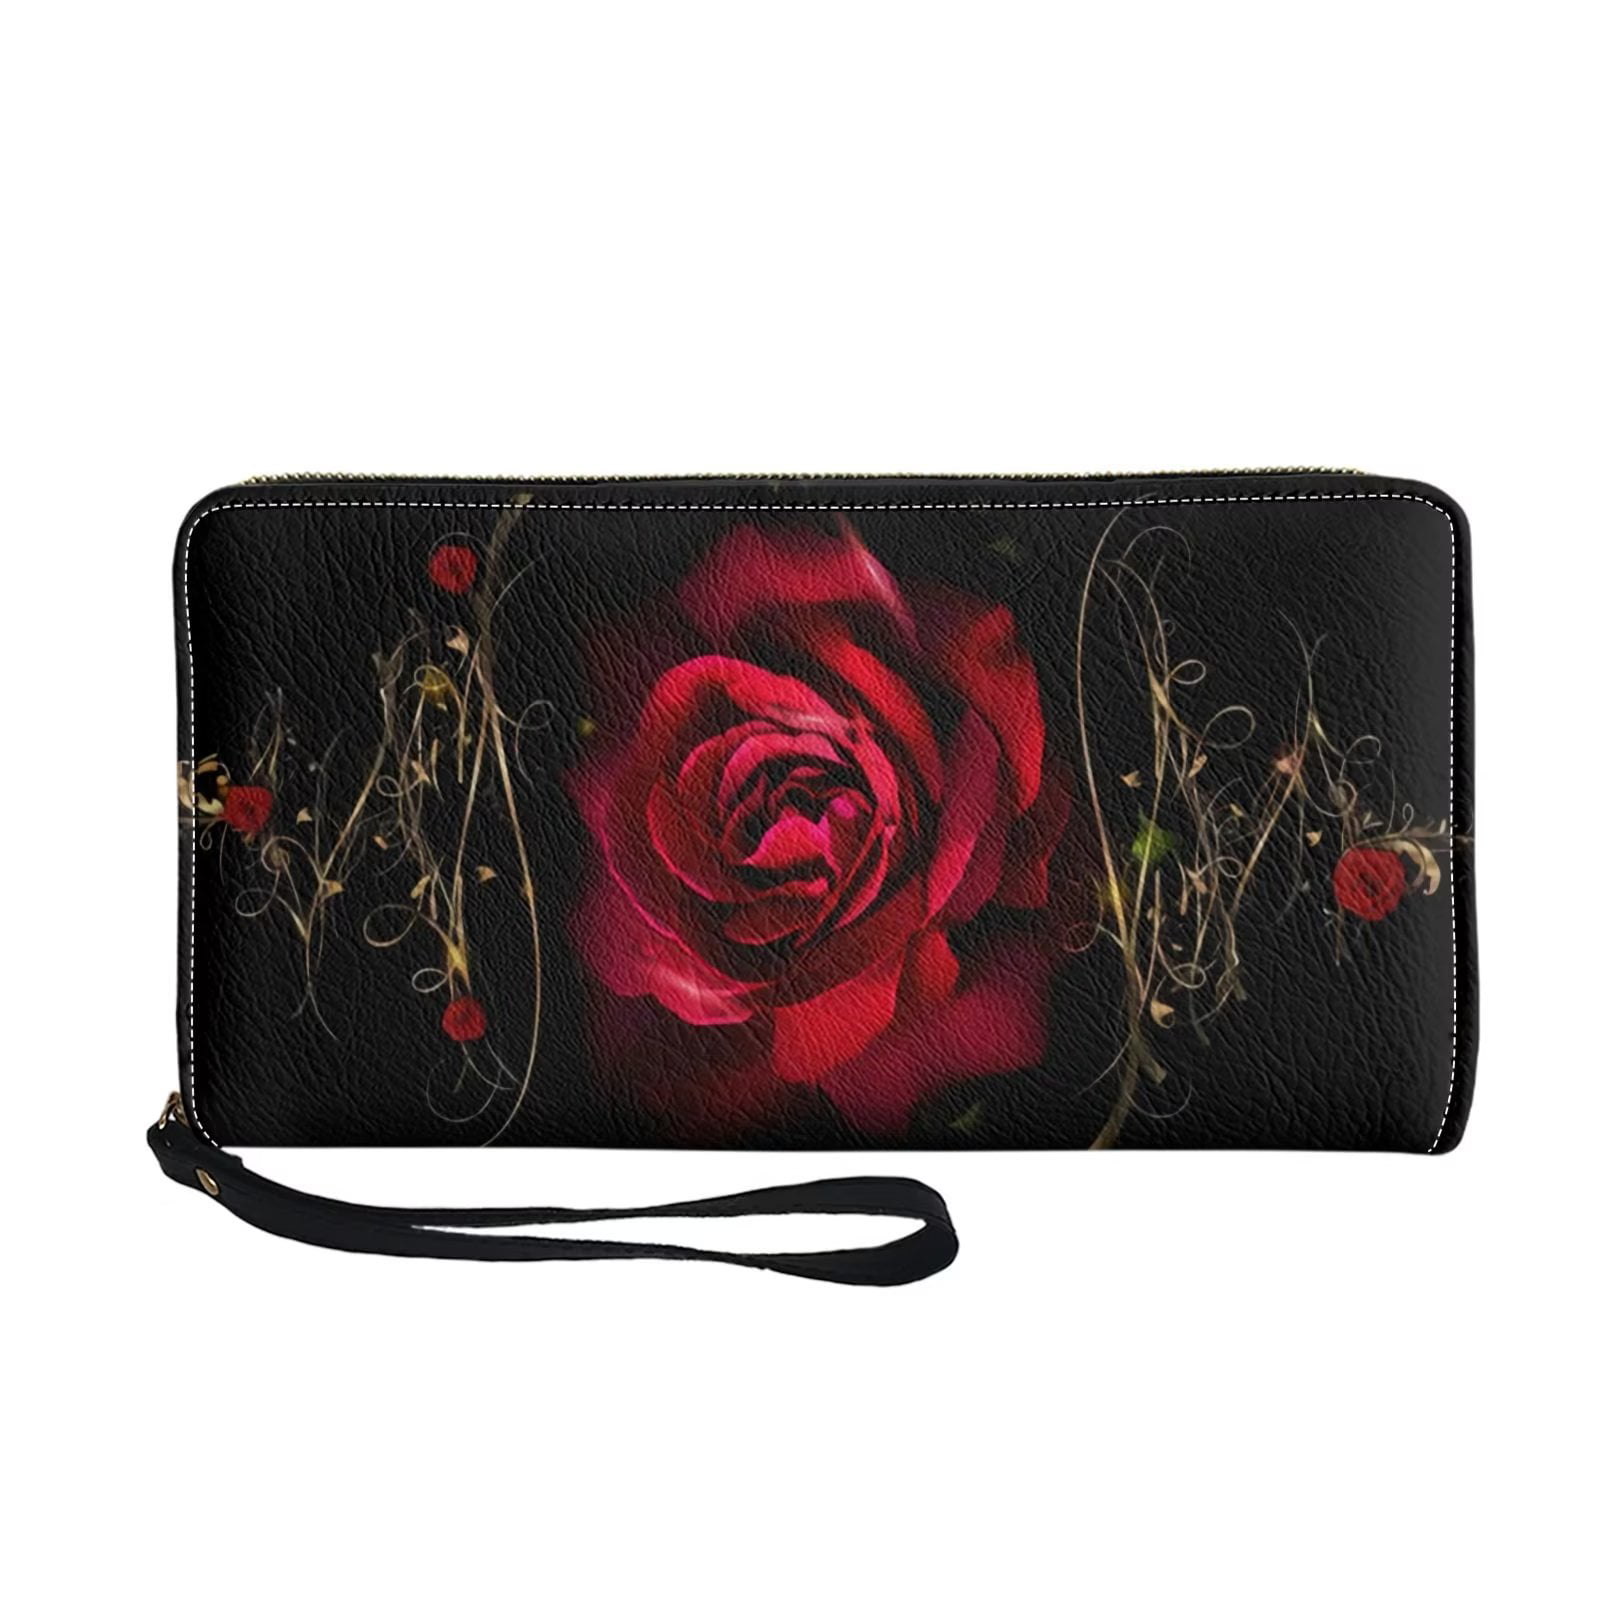 FKELYI Red Rose PU Leather Wristlet Wallets for Women Ladies,Drivers  License Wallet Handbags,Dating and Working Holder Snap Wallets Clutch